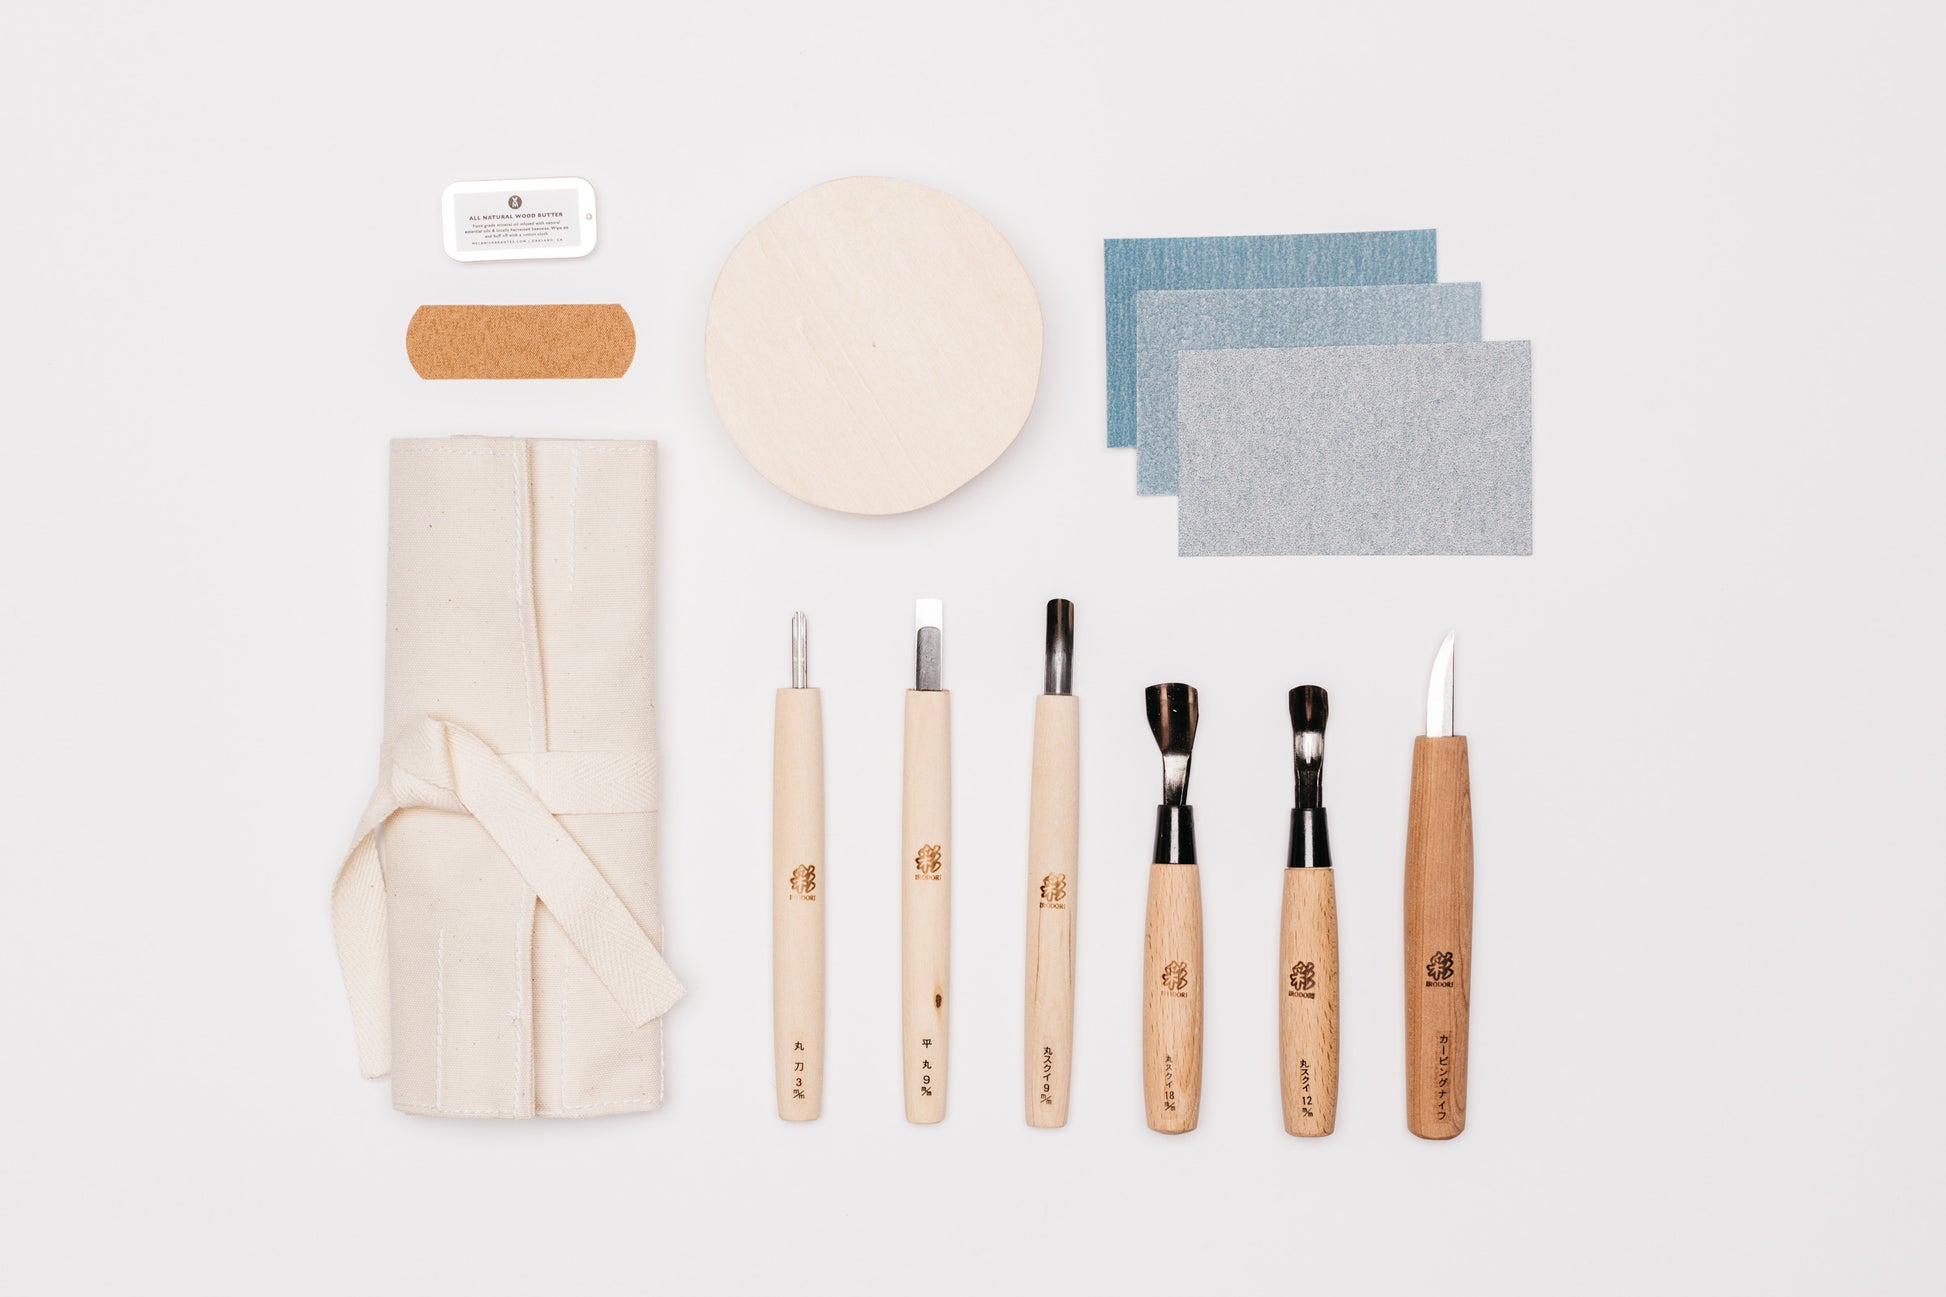 Japanese bowl carving kit. The items in the kit are laid out as follows, MA wood butter, bandaid, beige tool roll, six carving tools, bass bowl blank, and three sandpaper grits. 